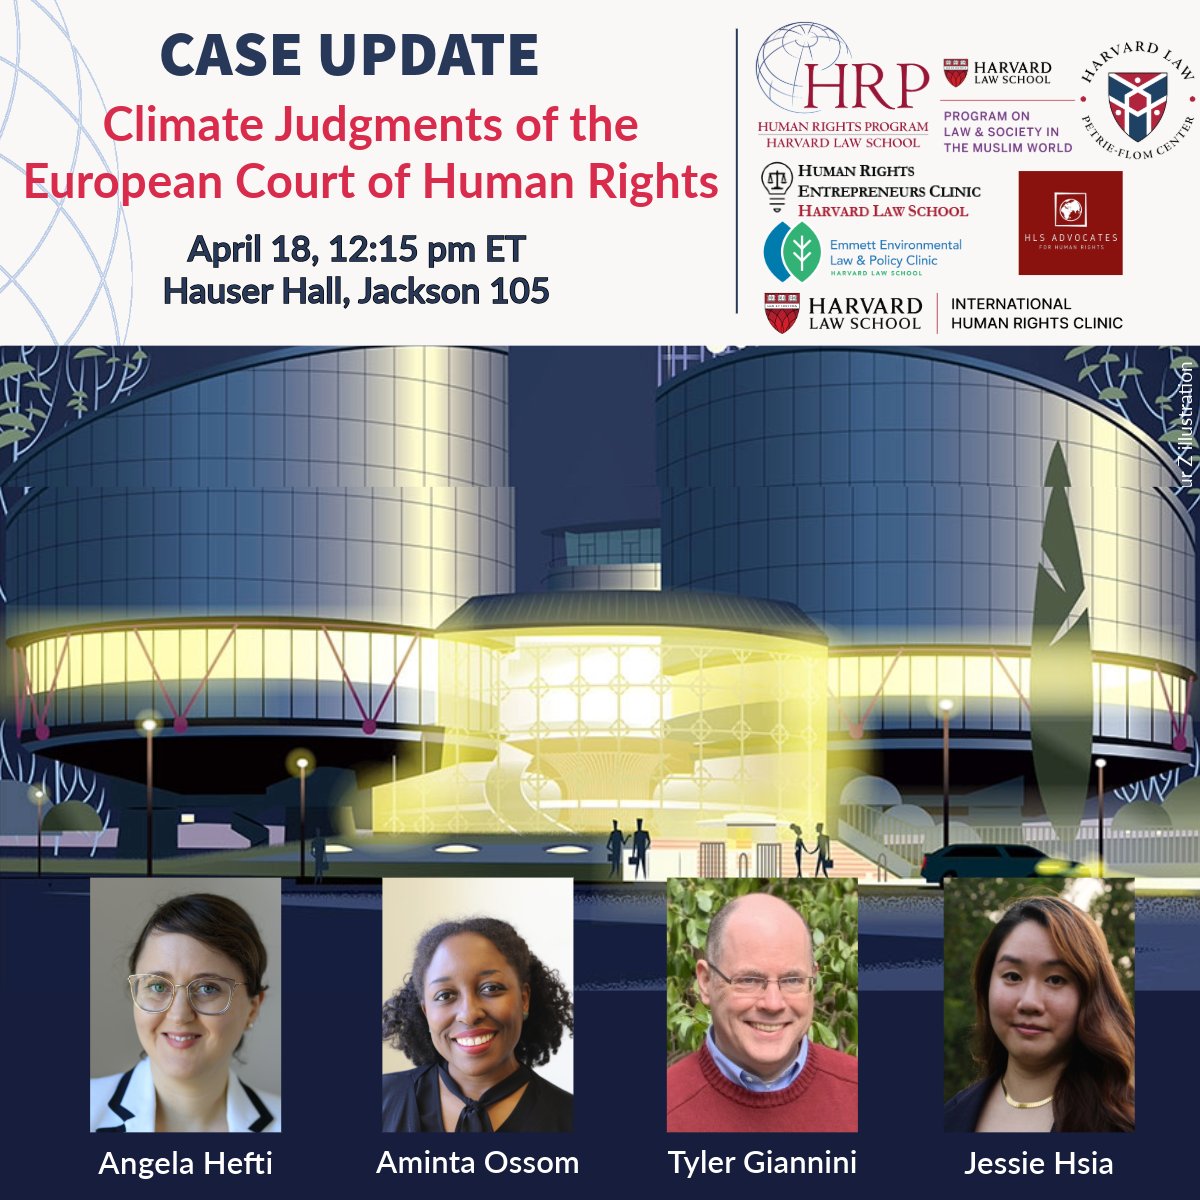 Join us in Jackson 105, Hauser Hall, on April 18 at 12:15 pm for a discussion of the recent decision by the @ECHR_CEDH in the #KlimaSeniorinnen case v. #Switzerland ruling that governments have human rights obligations to implement #climate mitigation.